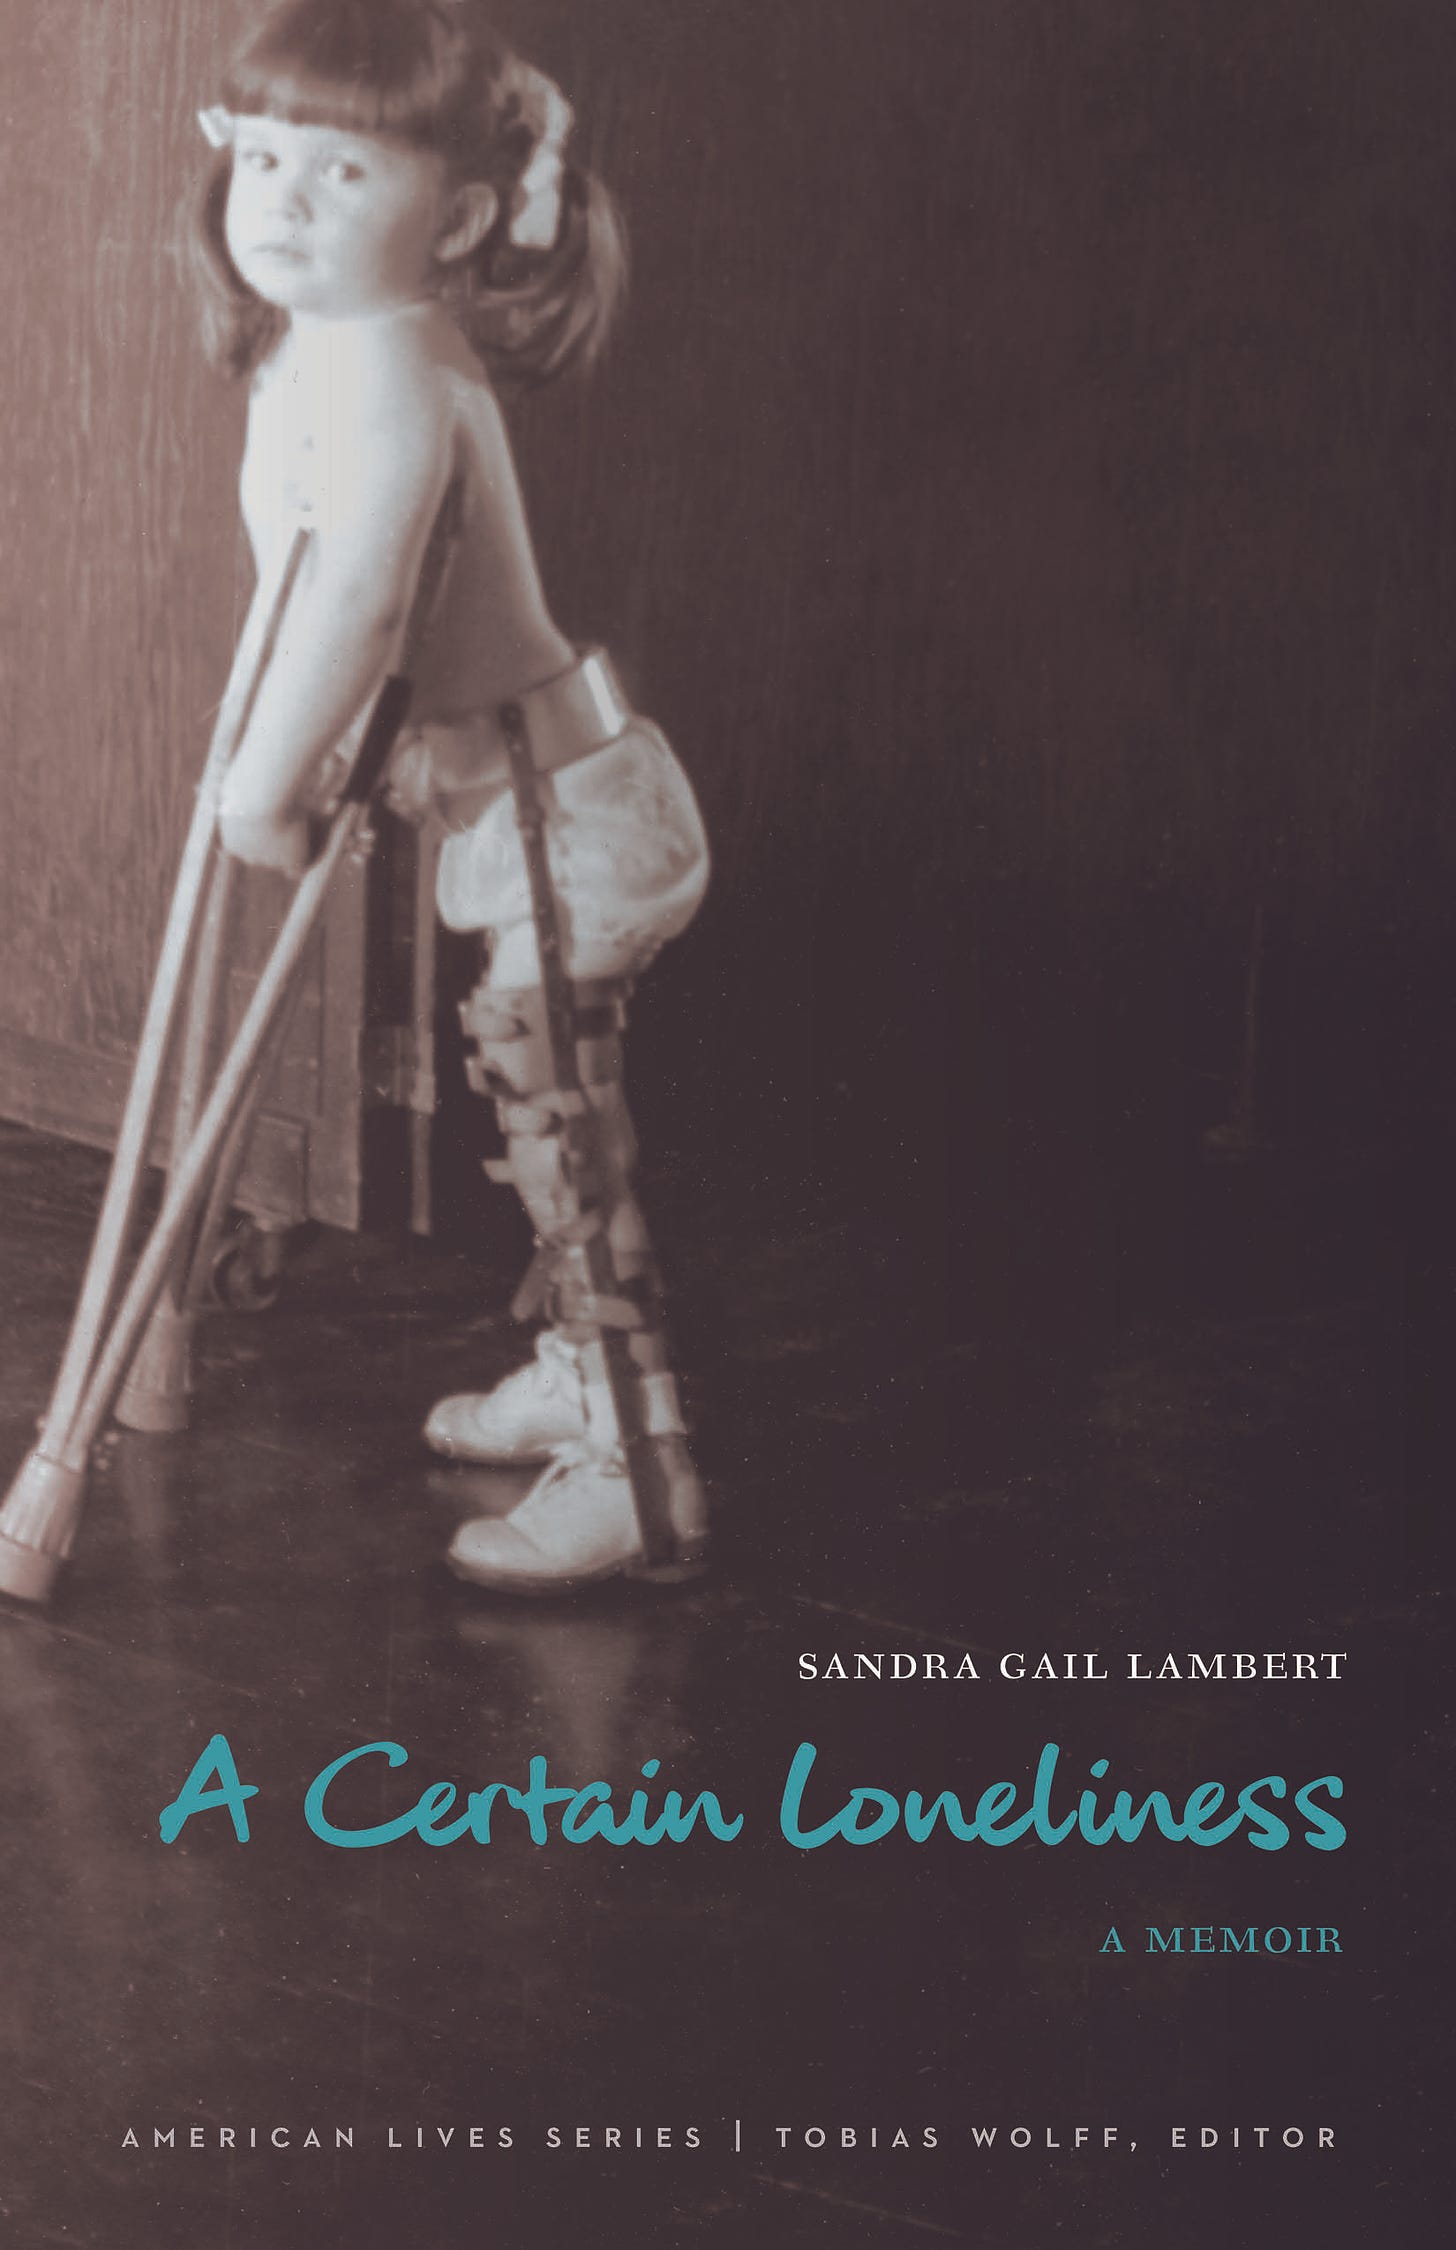 A book cover. The text says Sandra Gail Lambert, A Certain Loneliness: A Memoir, American Lives Series, Tobias Wolff, Editor. The black and white photo is of a white toddler with legs braces and wearing only a diaper, white socks, and ribbons in her hair. She has wooden crutches tucked into her armpits. 